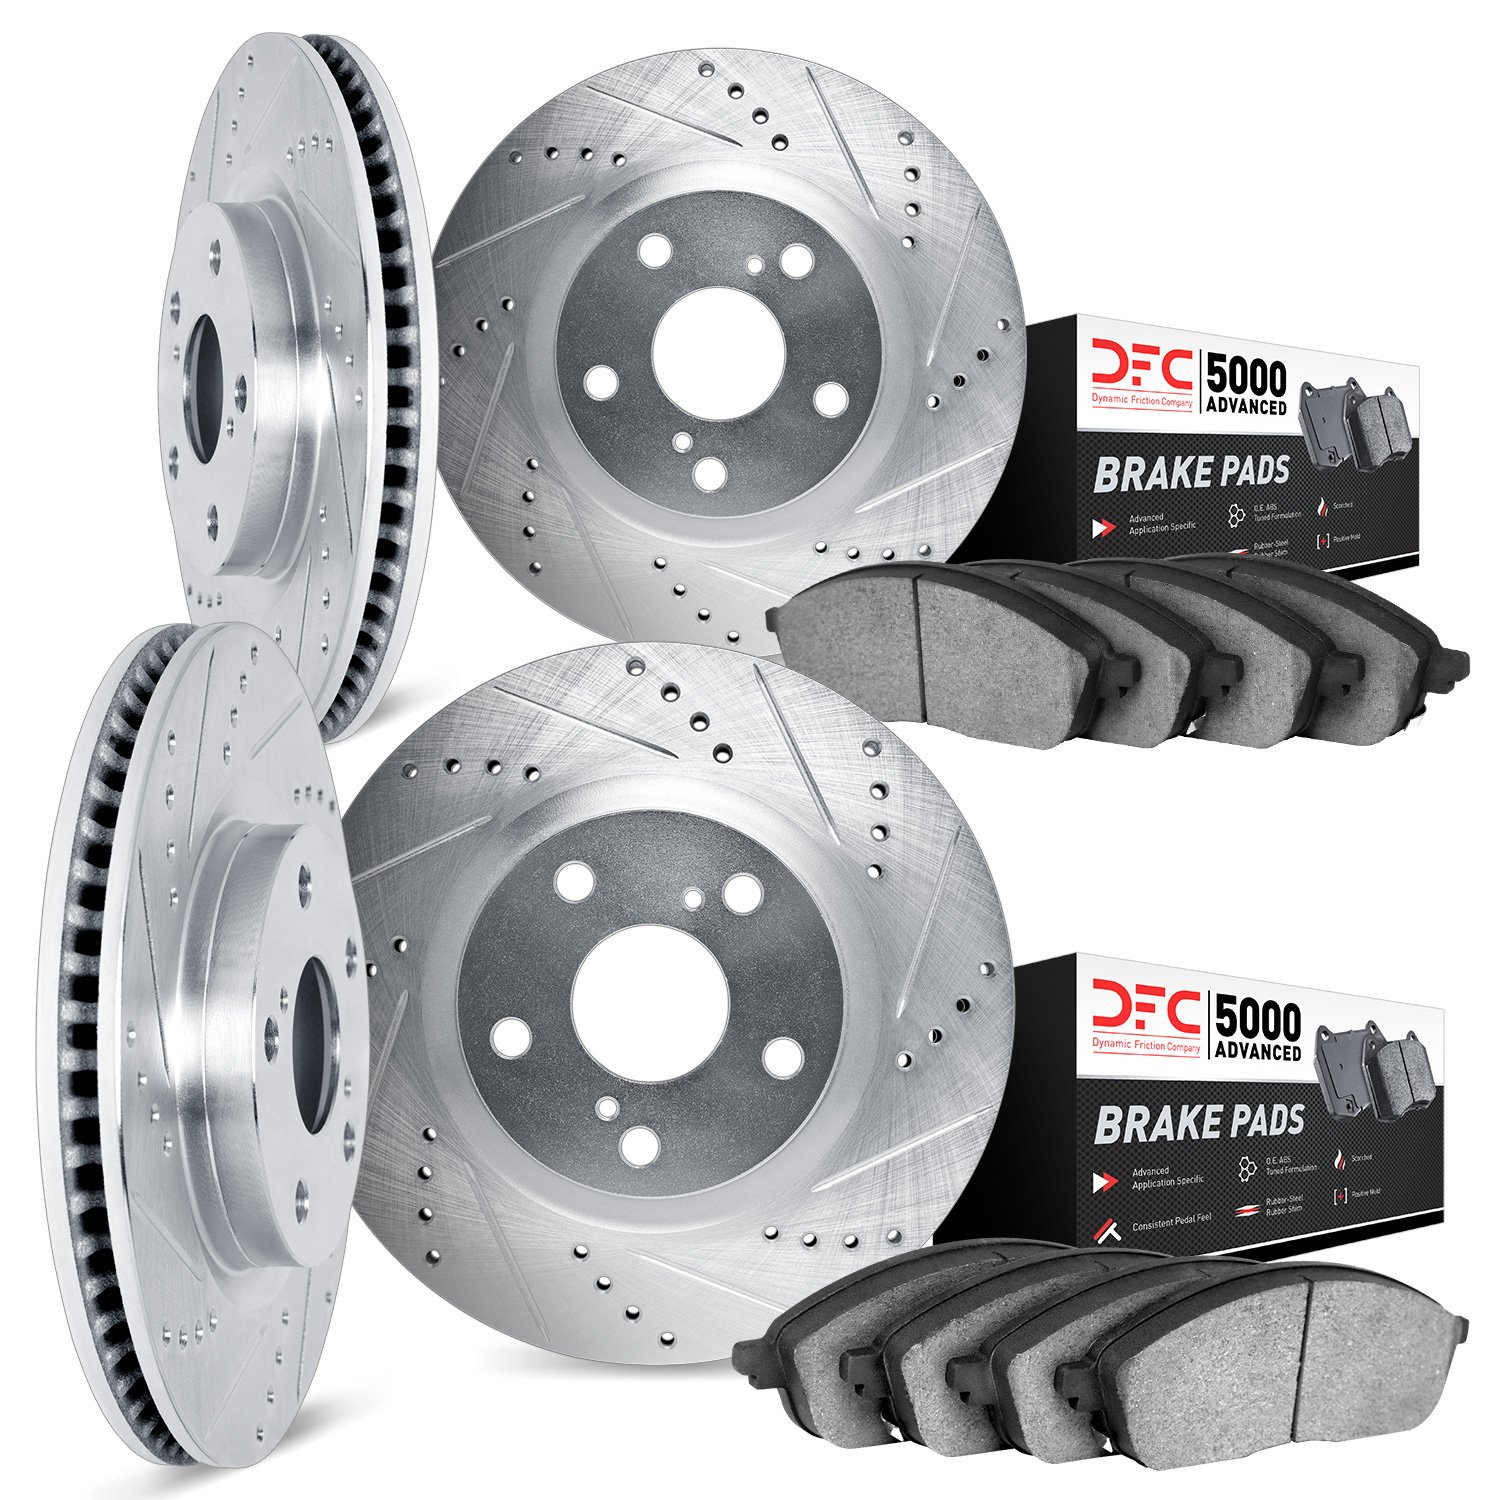 7504-31018 Drilled/Slotted Brake Rotors w/5000 Advanced Brake Pads Kit [Silver], 2004-2010 BMW, Position: Front and Rear